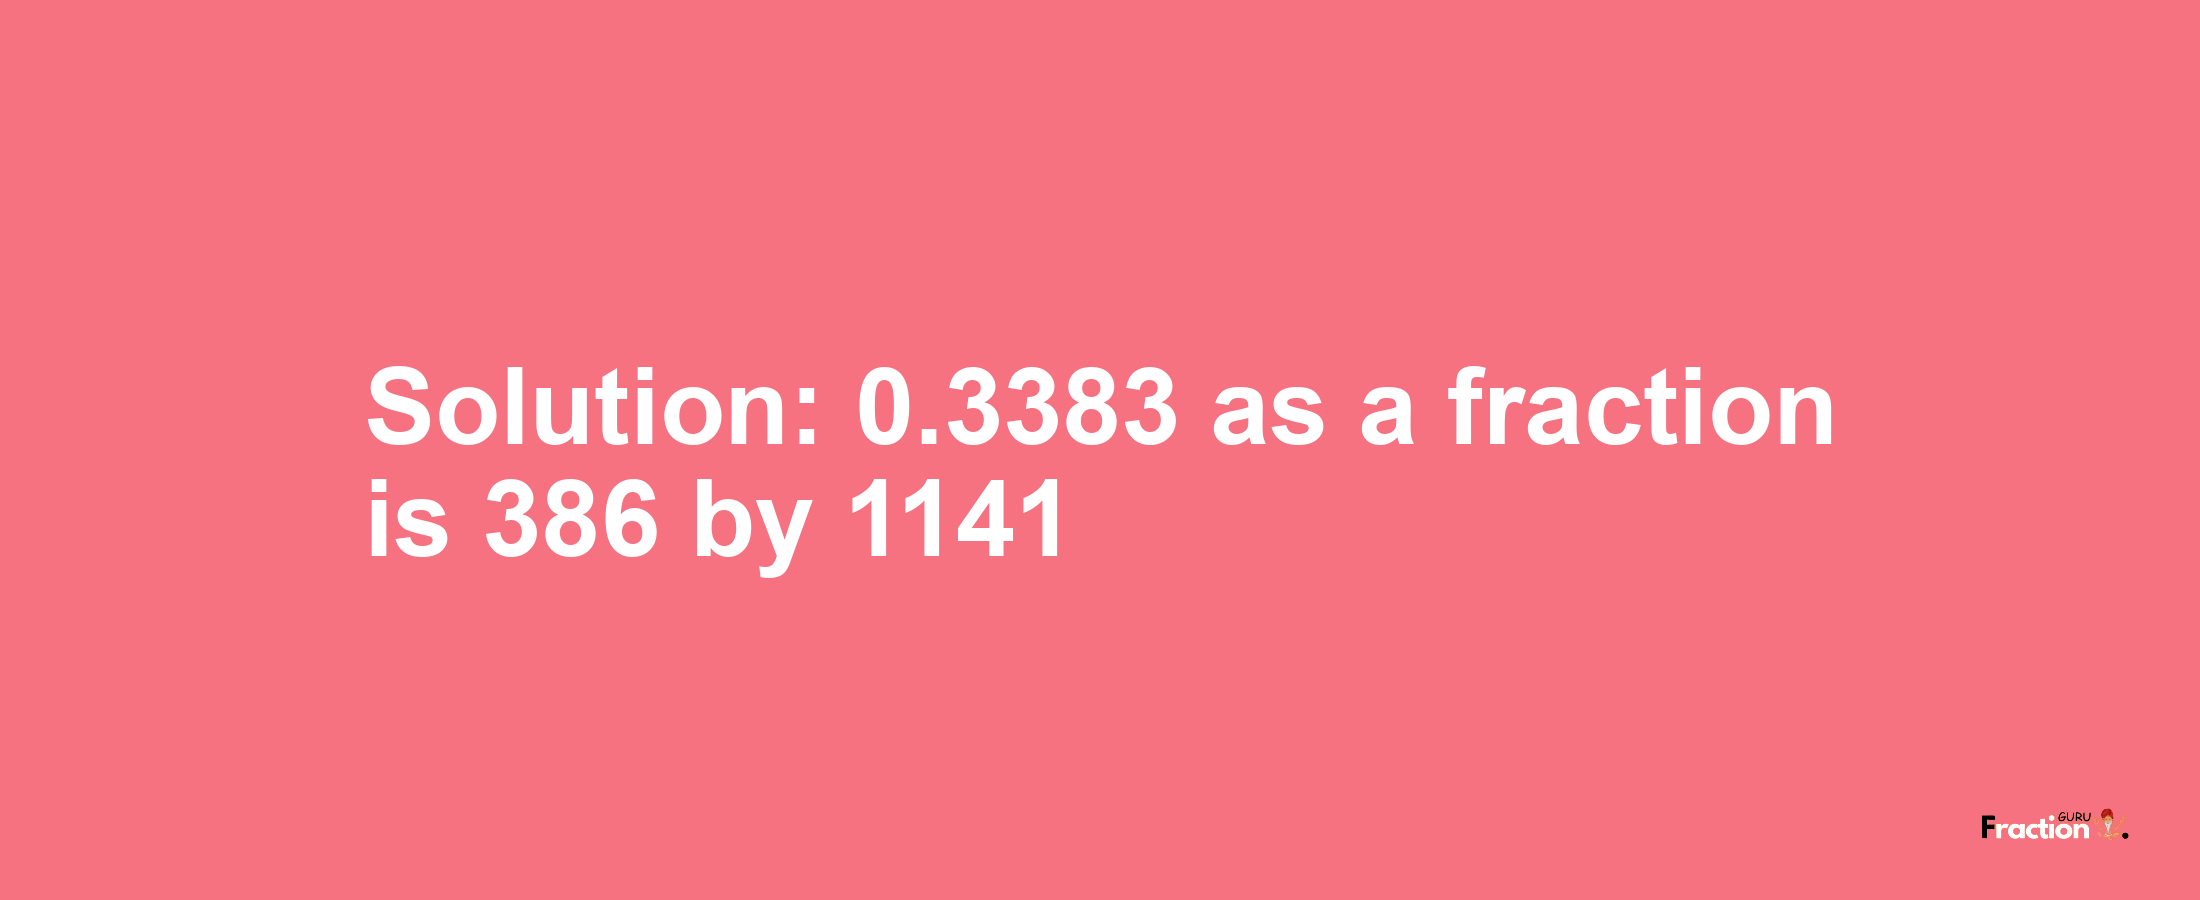 Solution:0.3383 as a fraction is 386/1141